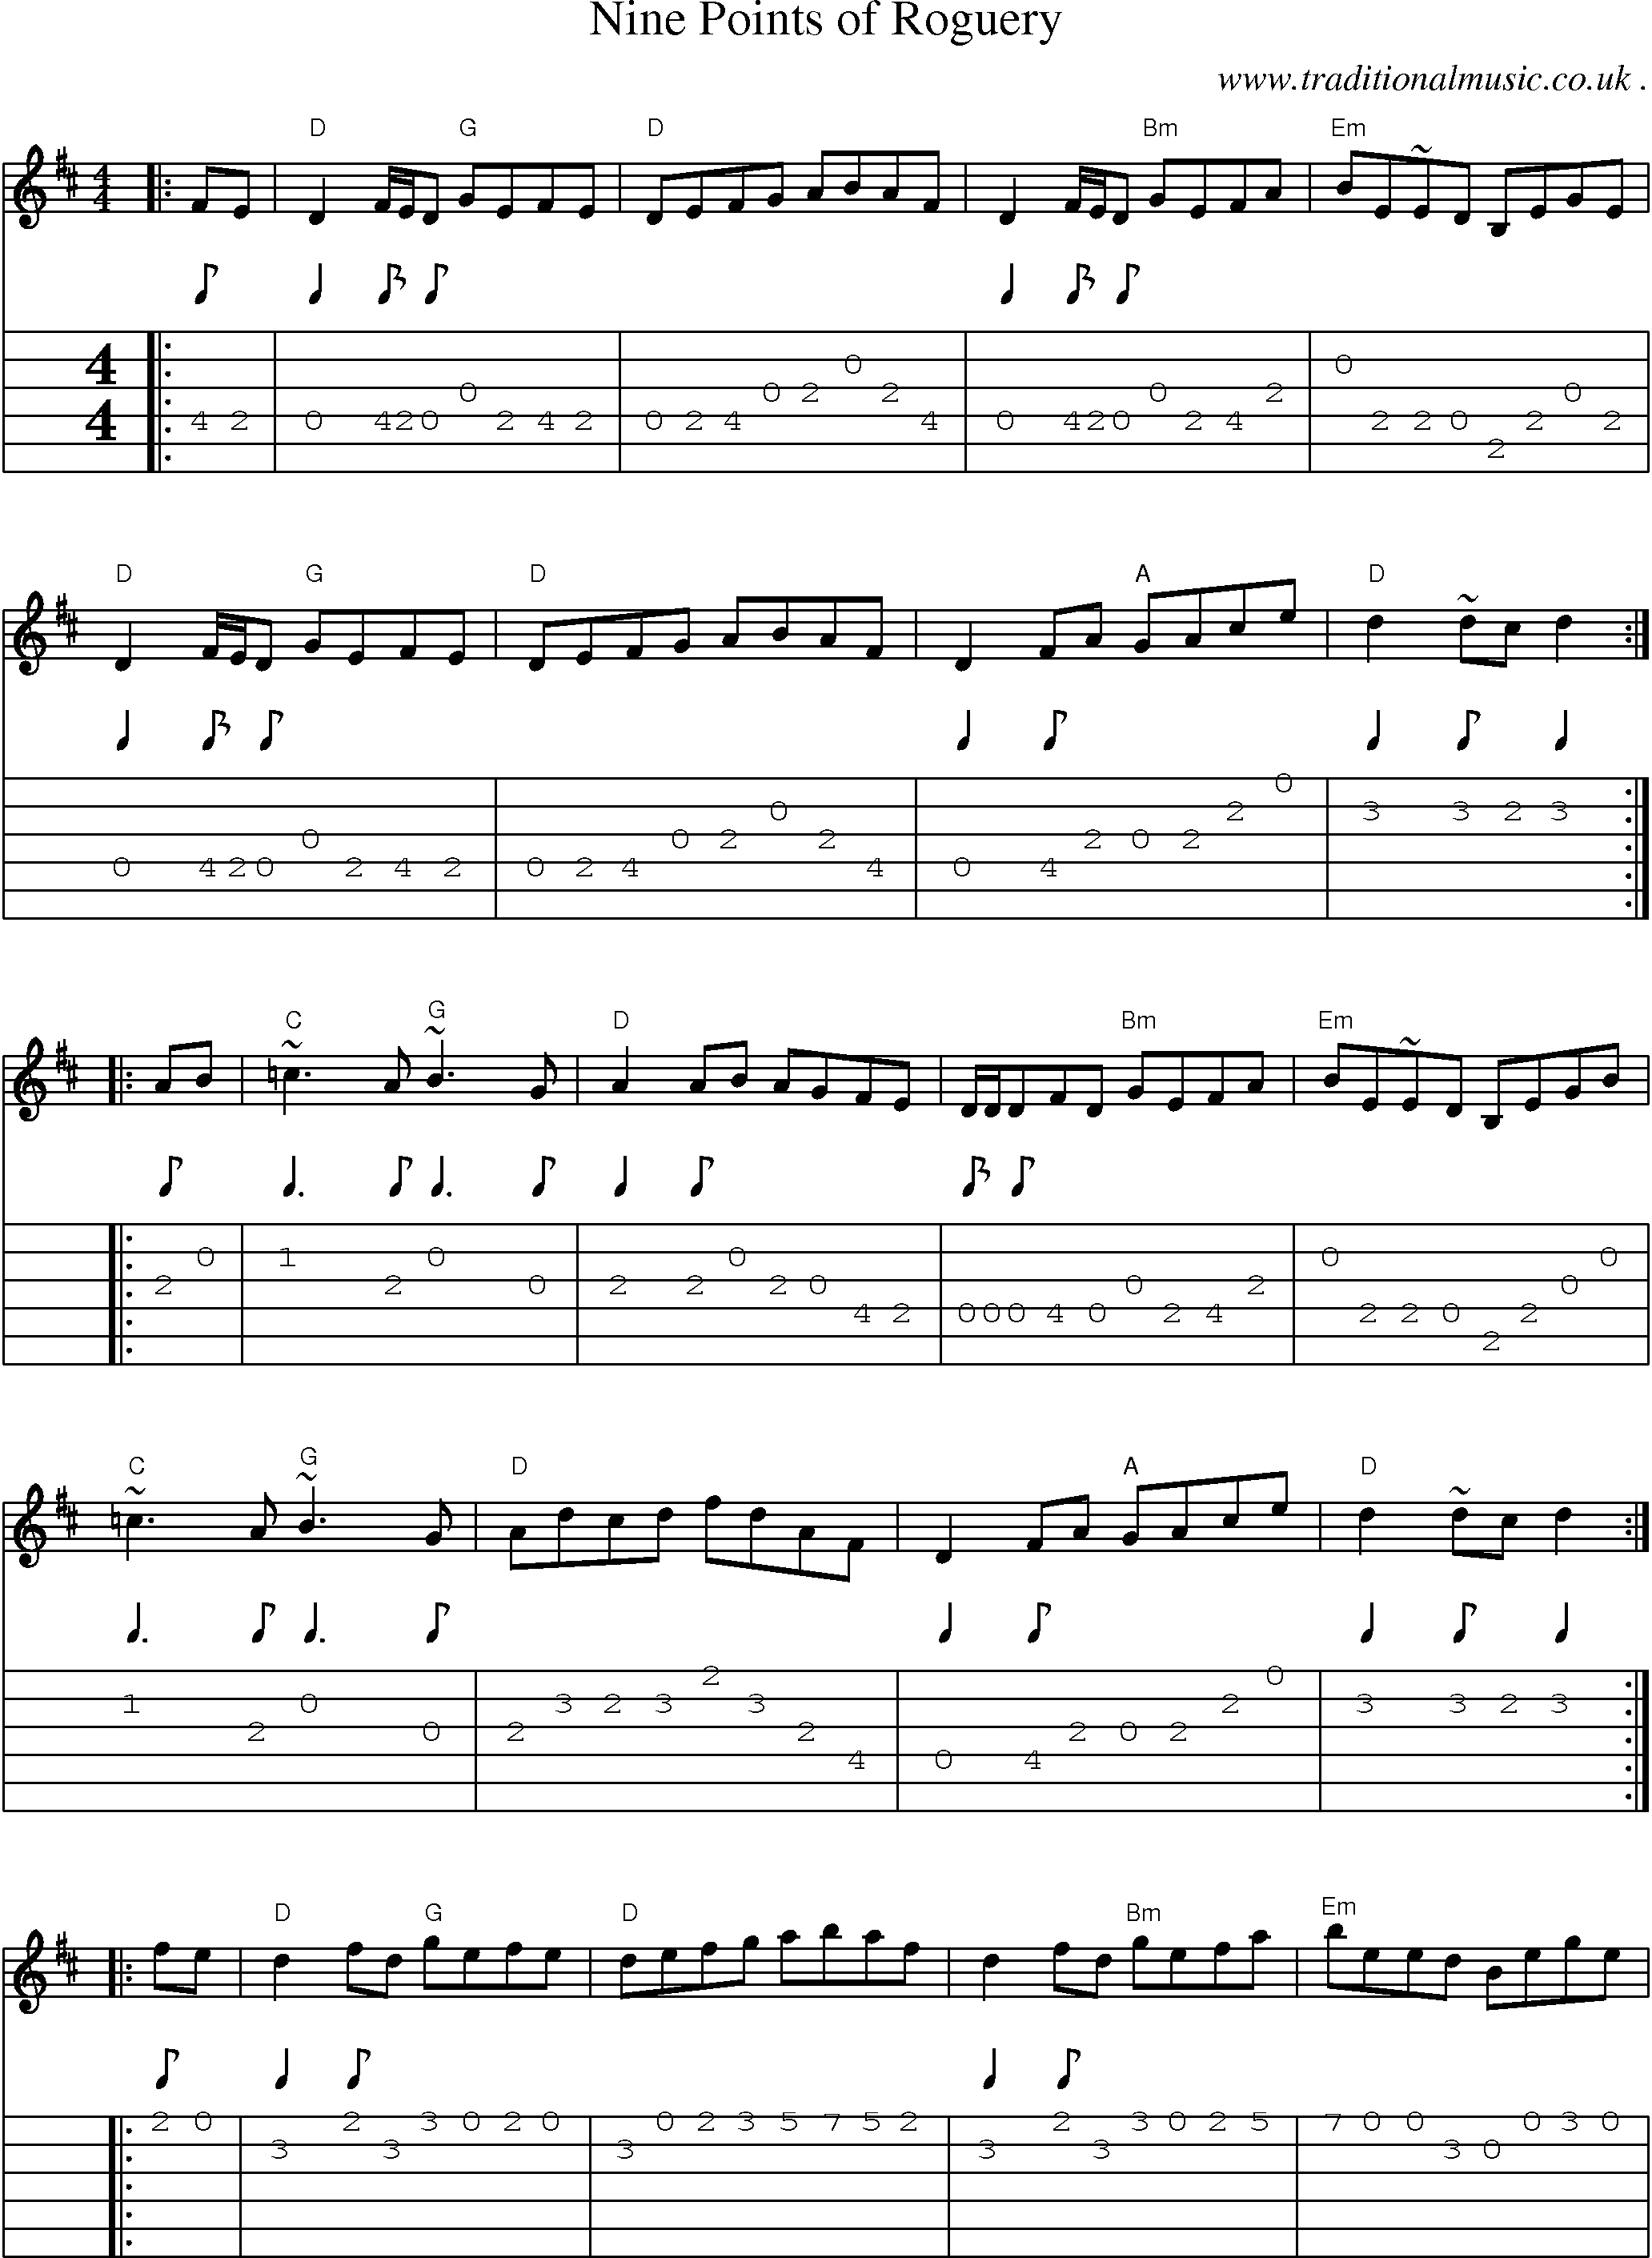 Music Score and Guitar Tabs for Nine Points Of Roguery